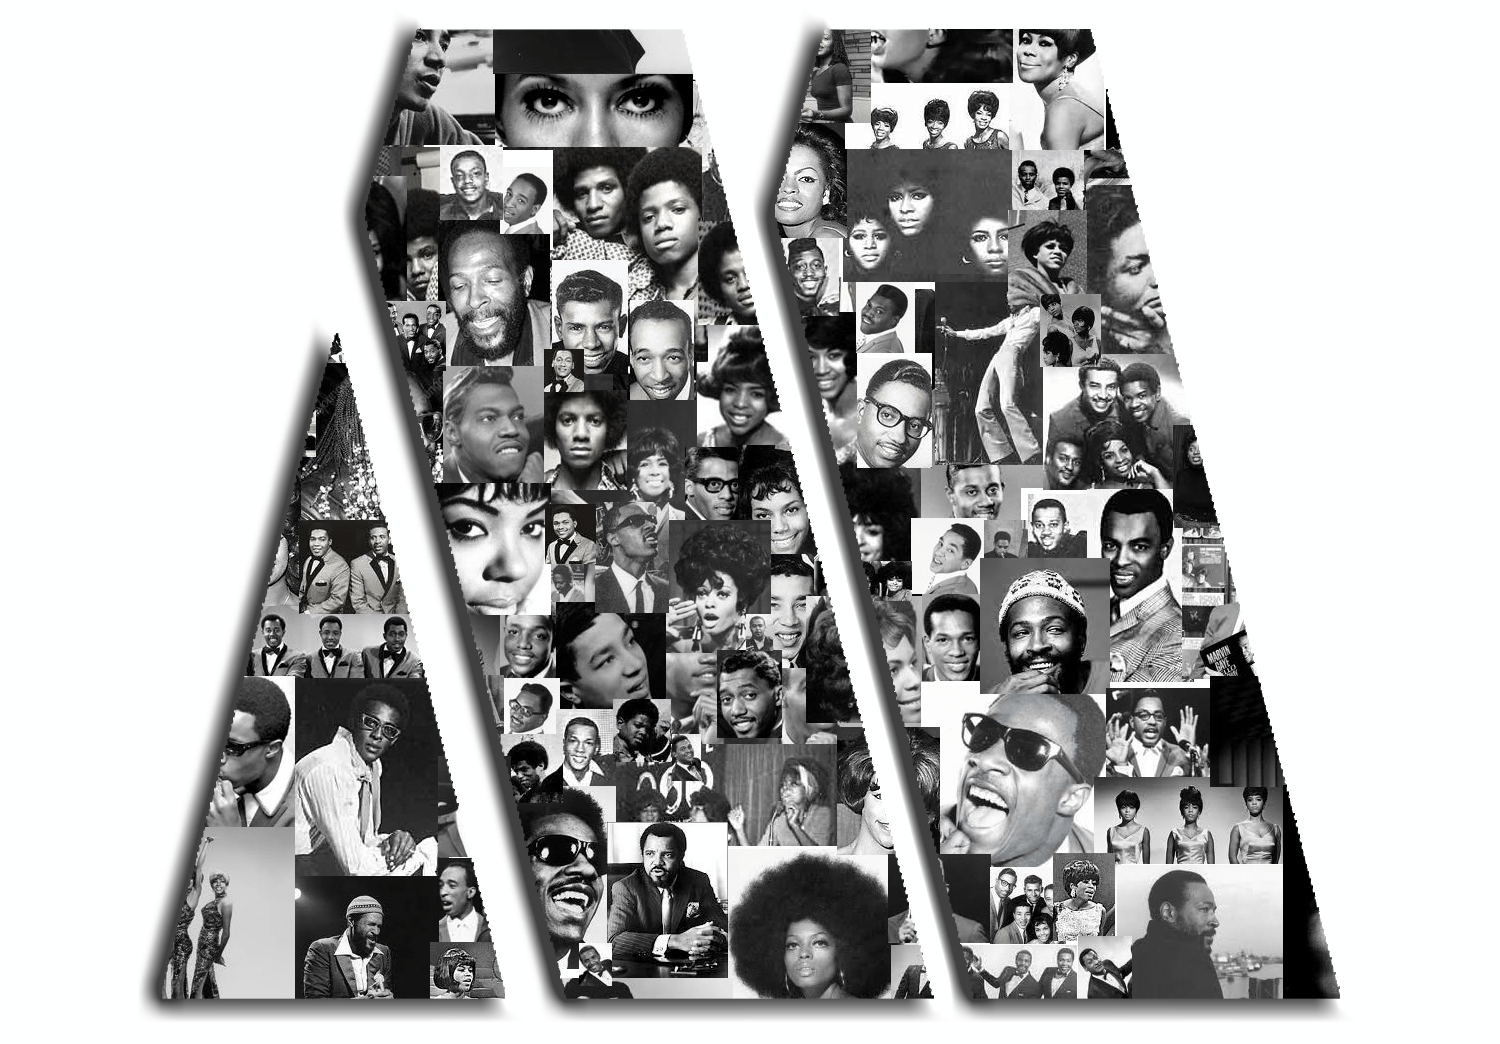 The 5 most iconic Motown Musicians